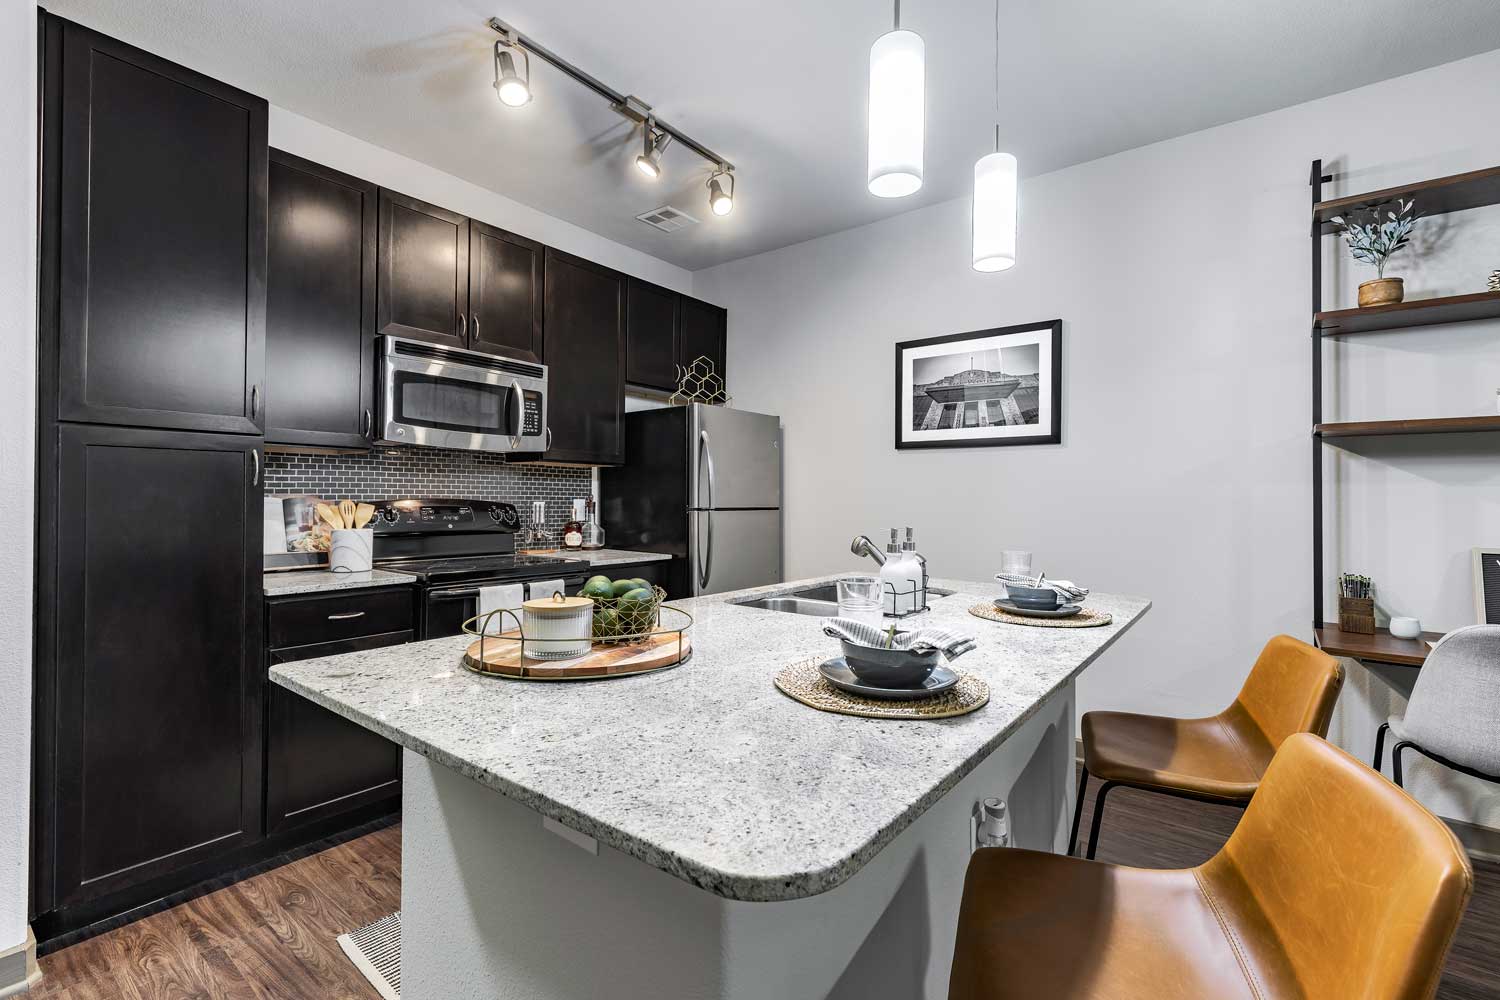 model kitchen - The Southwestern, luxury 1 & 2 bedroom apartments in Dallas